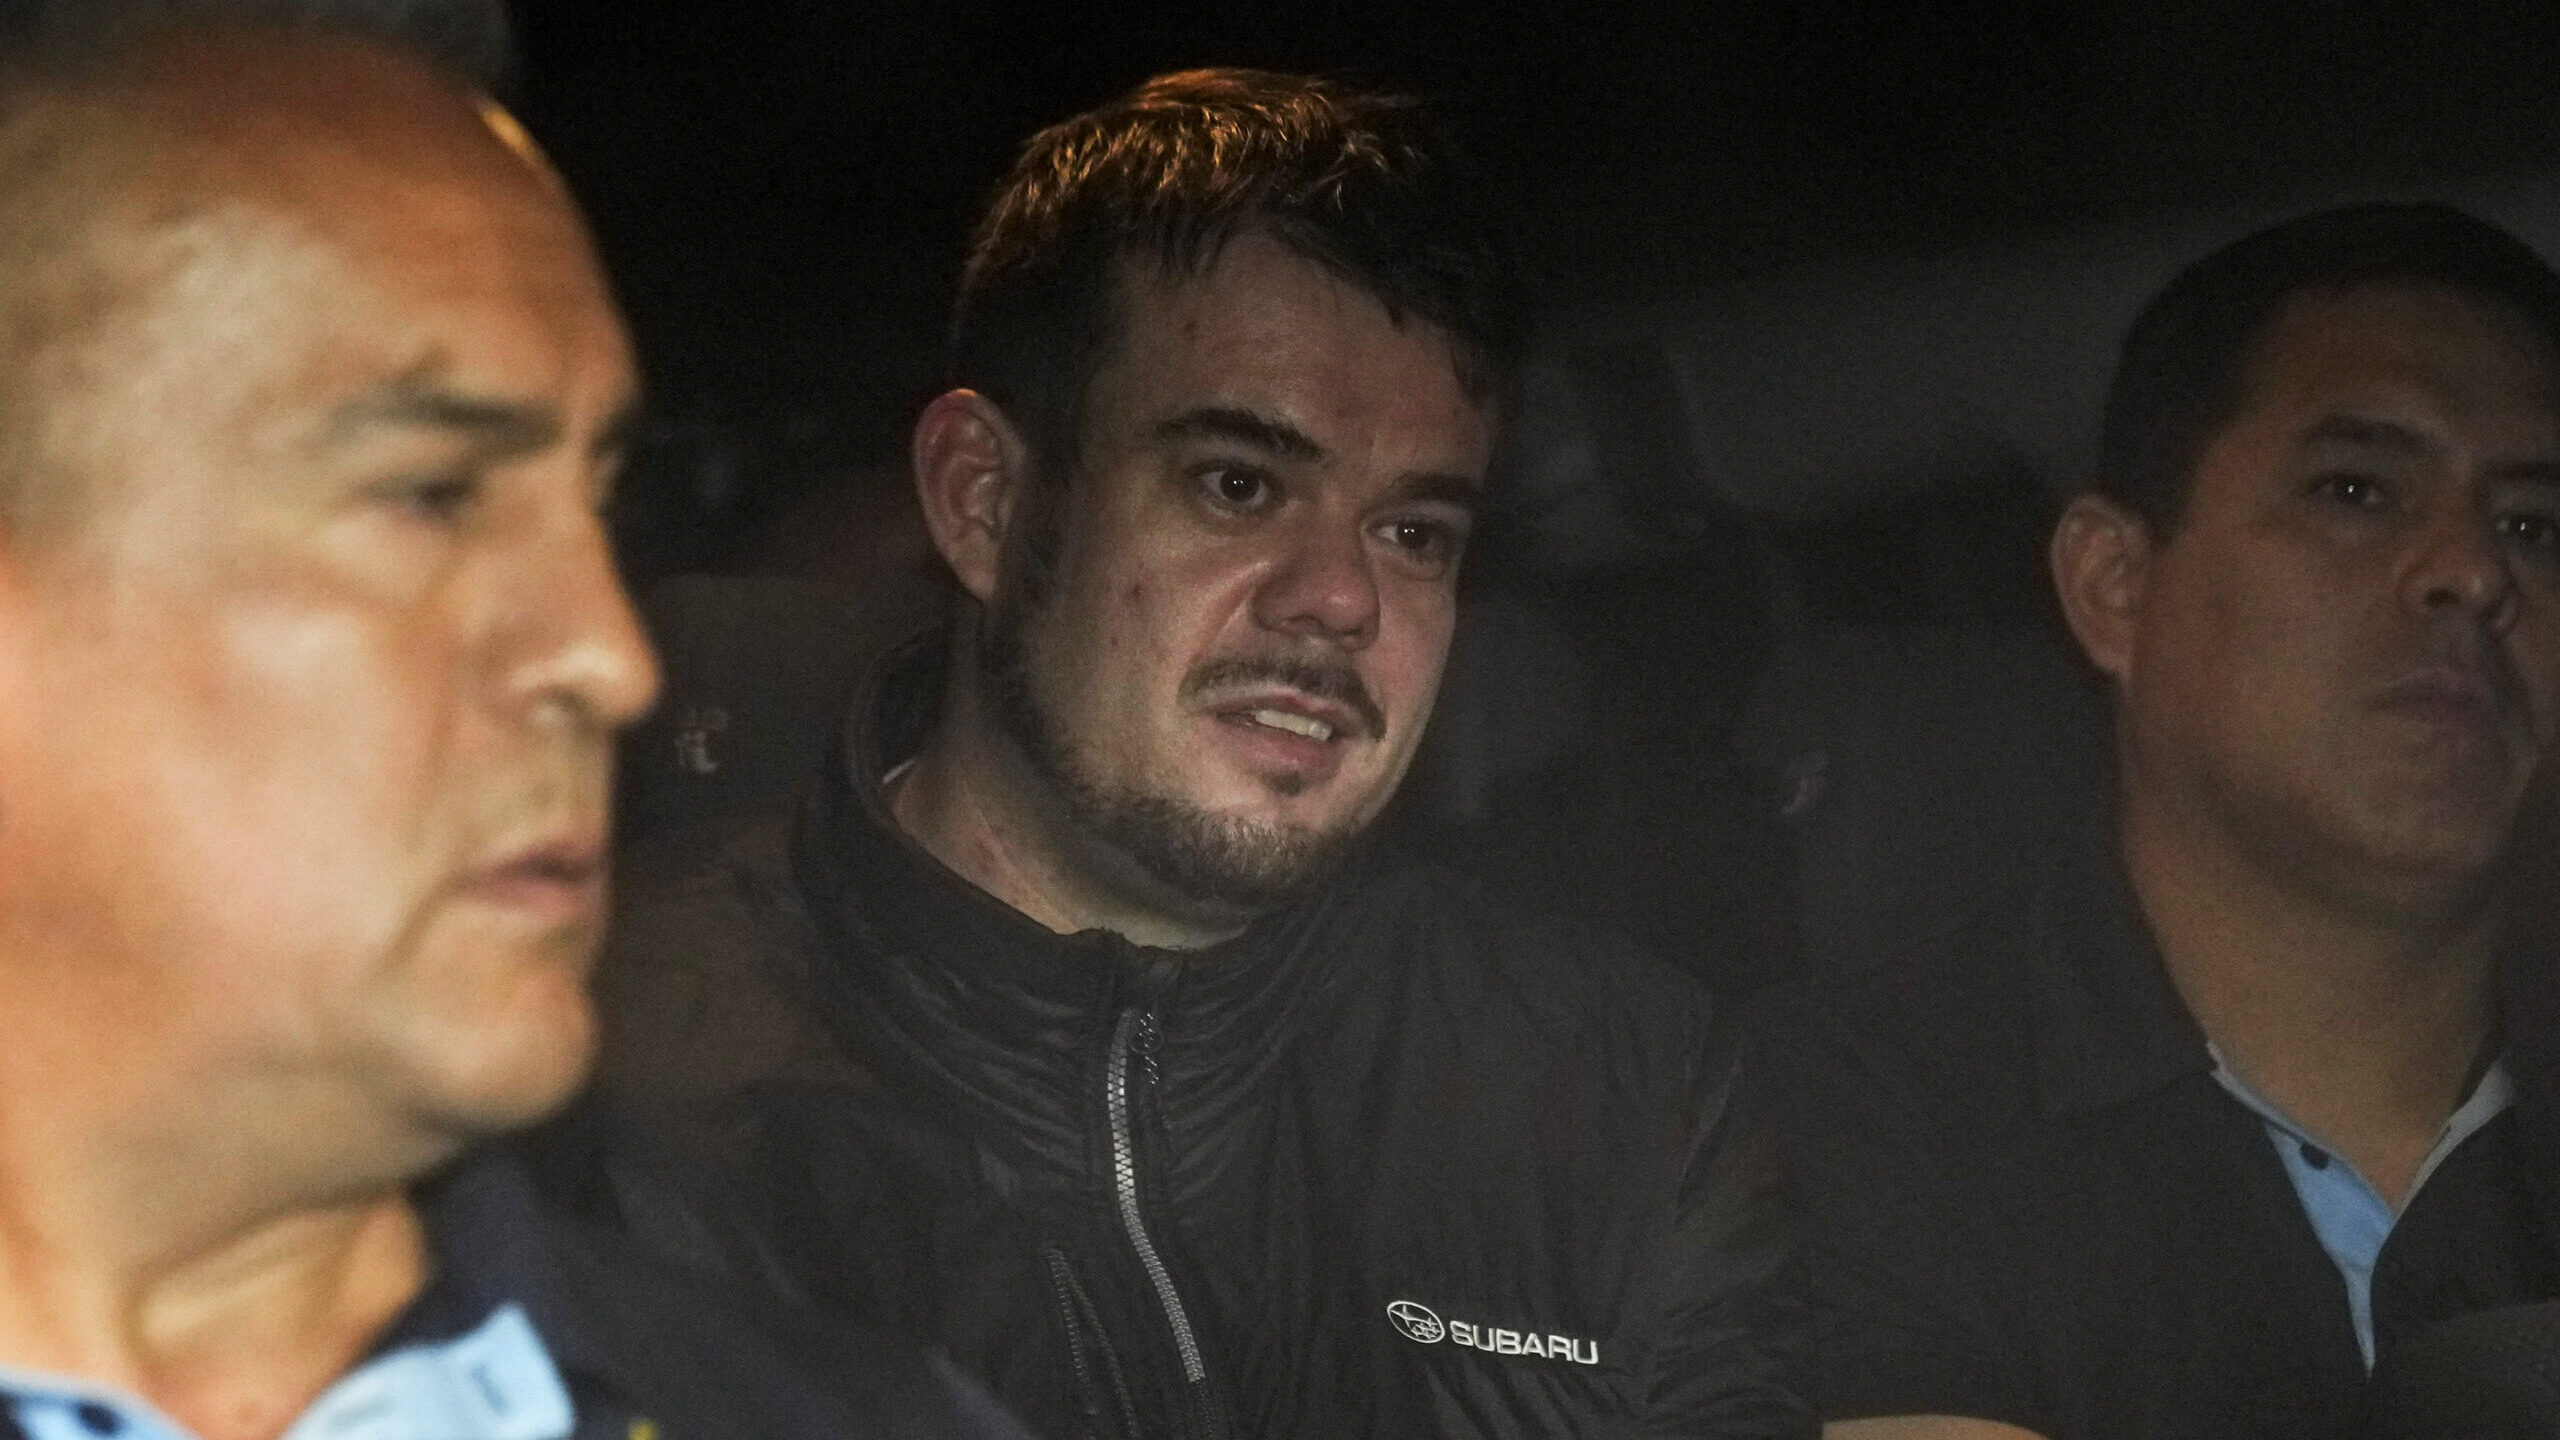 Dutch citizen Joran van der Sloot is driven in a police vehicle from a maximum-security prison to a...